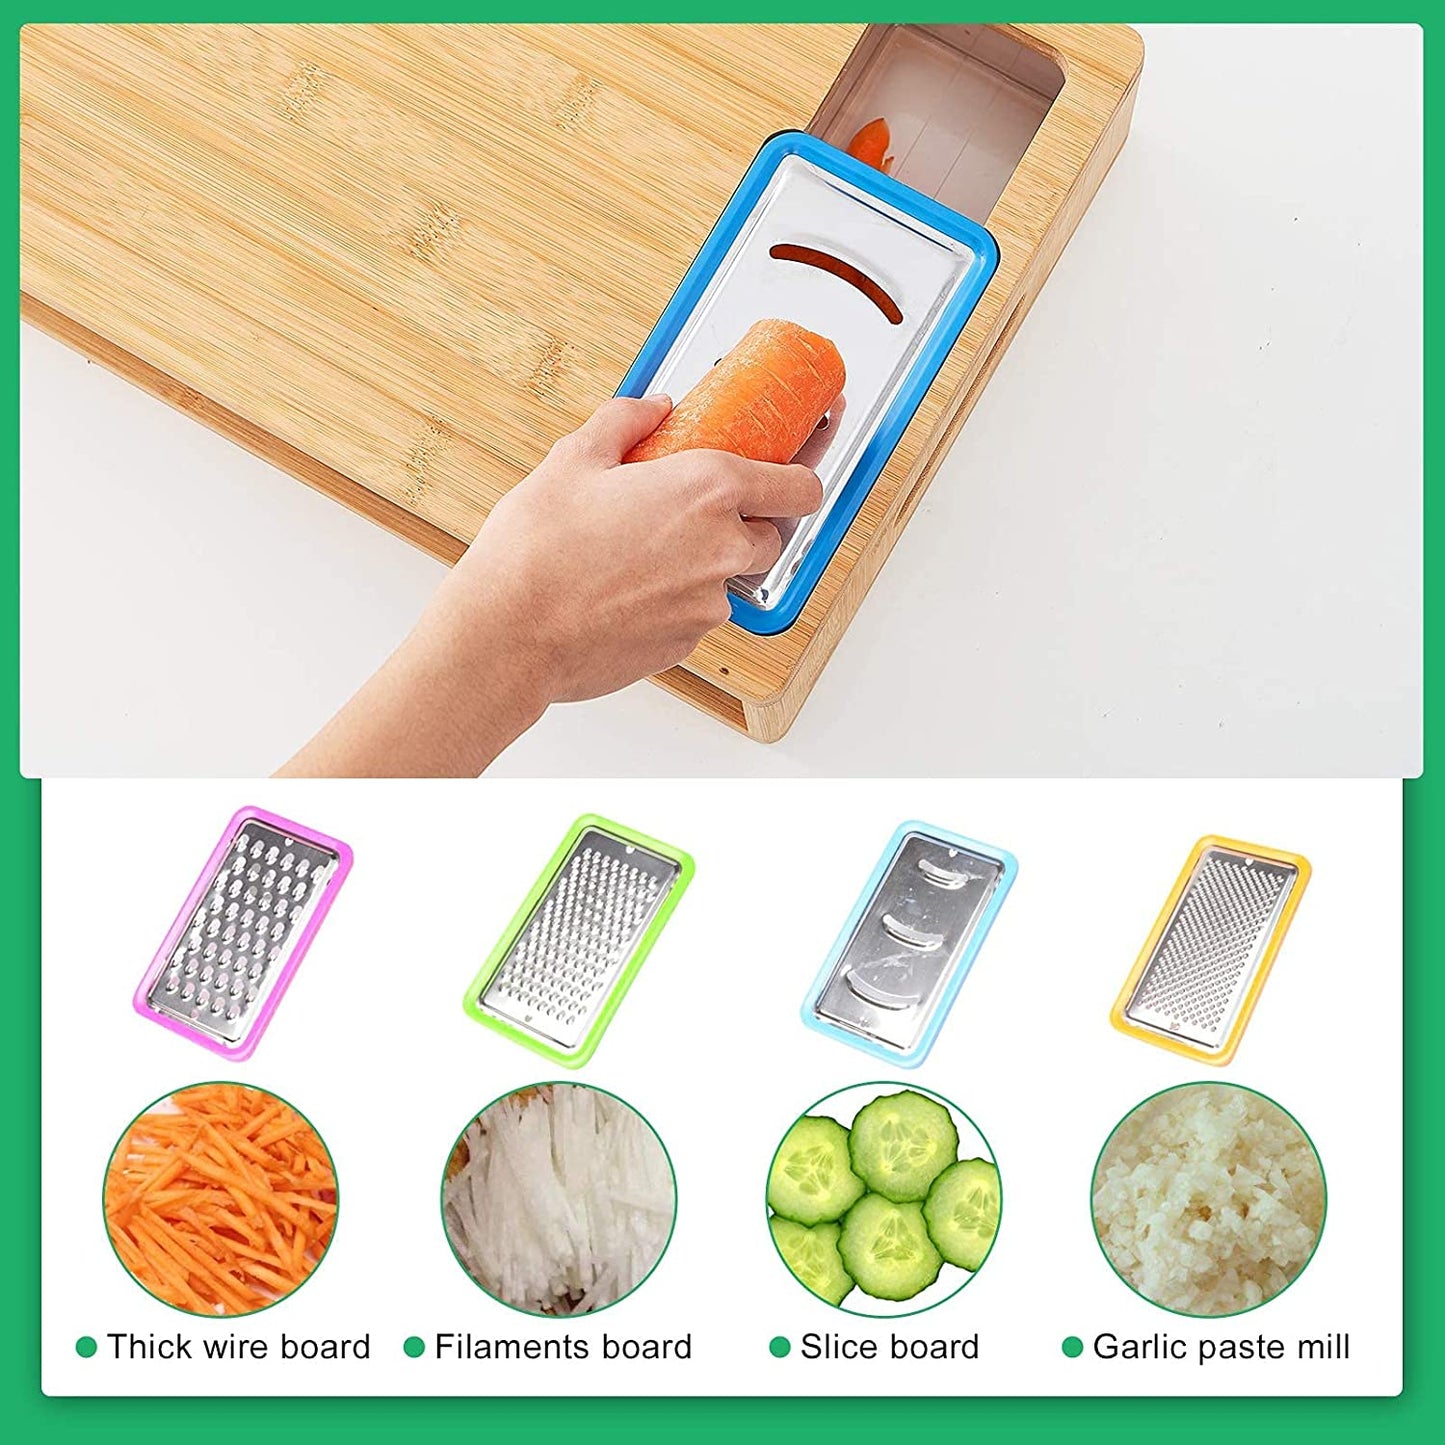 Four different sized graters and food shredders